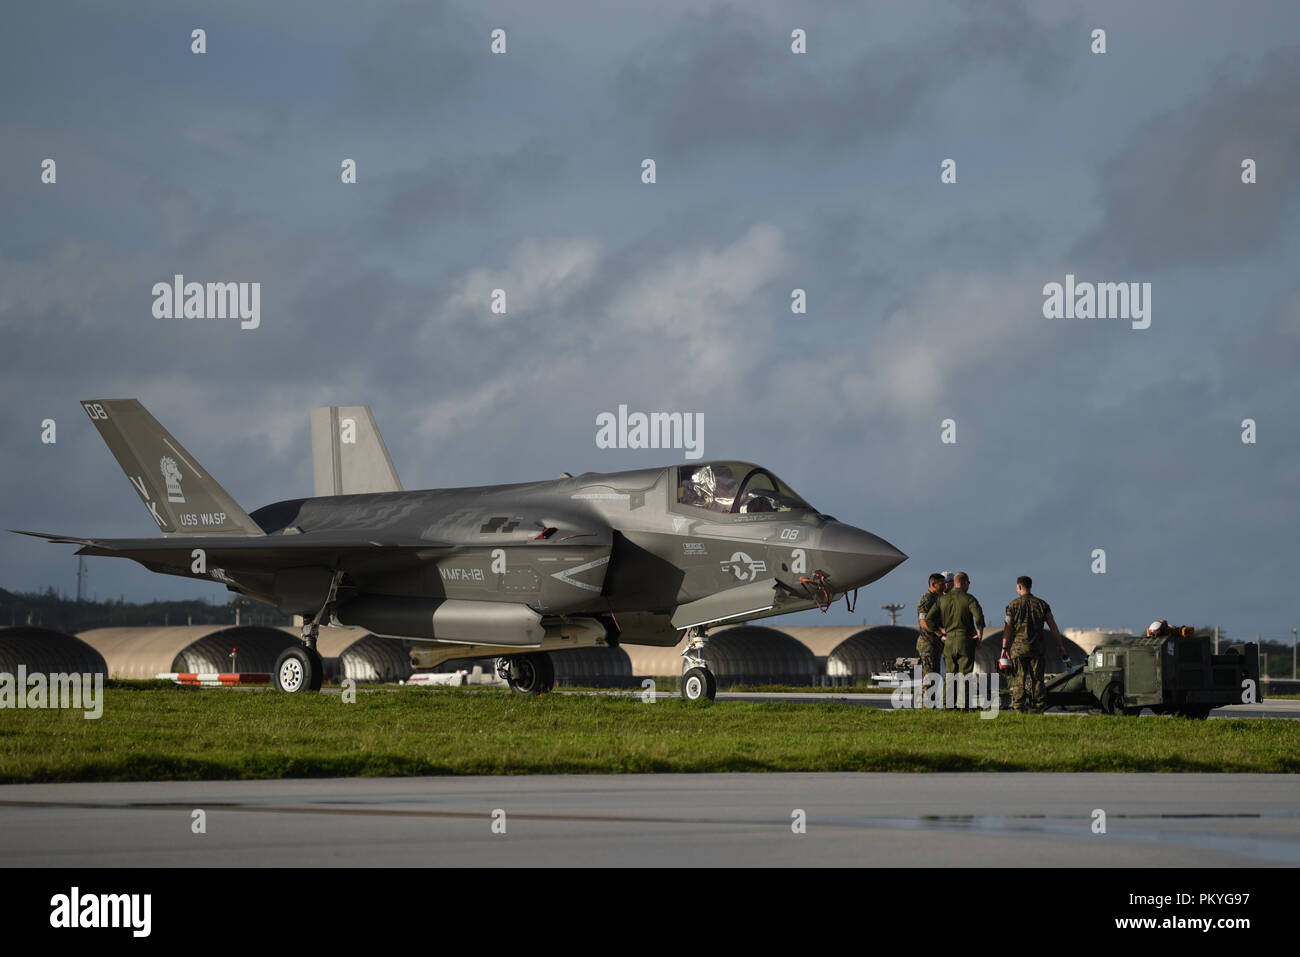 A U.S. Marine F-35B Lightning II with Marine Fighter Attack Squadron 121 sits on the flightline before a live-fire training exercise during Valiant Shield 2018 Sept. 16, 2018, at Andersen Air Force Base, Guam. Valiant Shield is a biennial, U.S. only, field training exercise with a focus on integration of joint training among U.S. forces. (U.S. Air Force photo by Senior Airmen Gerald R. Willis) Stock Photo